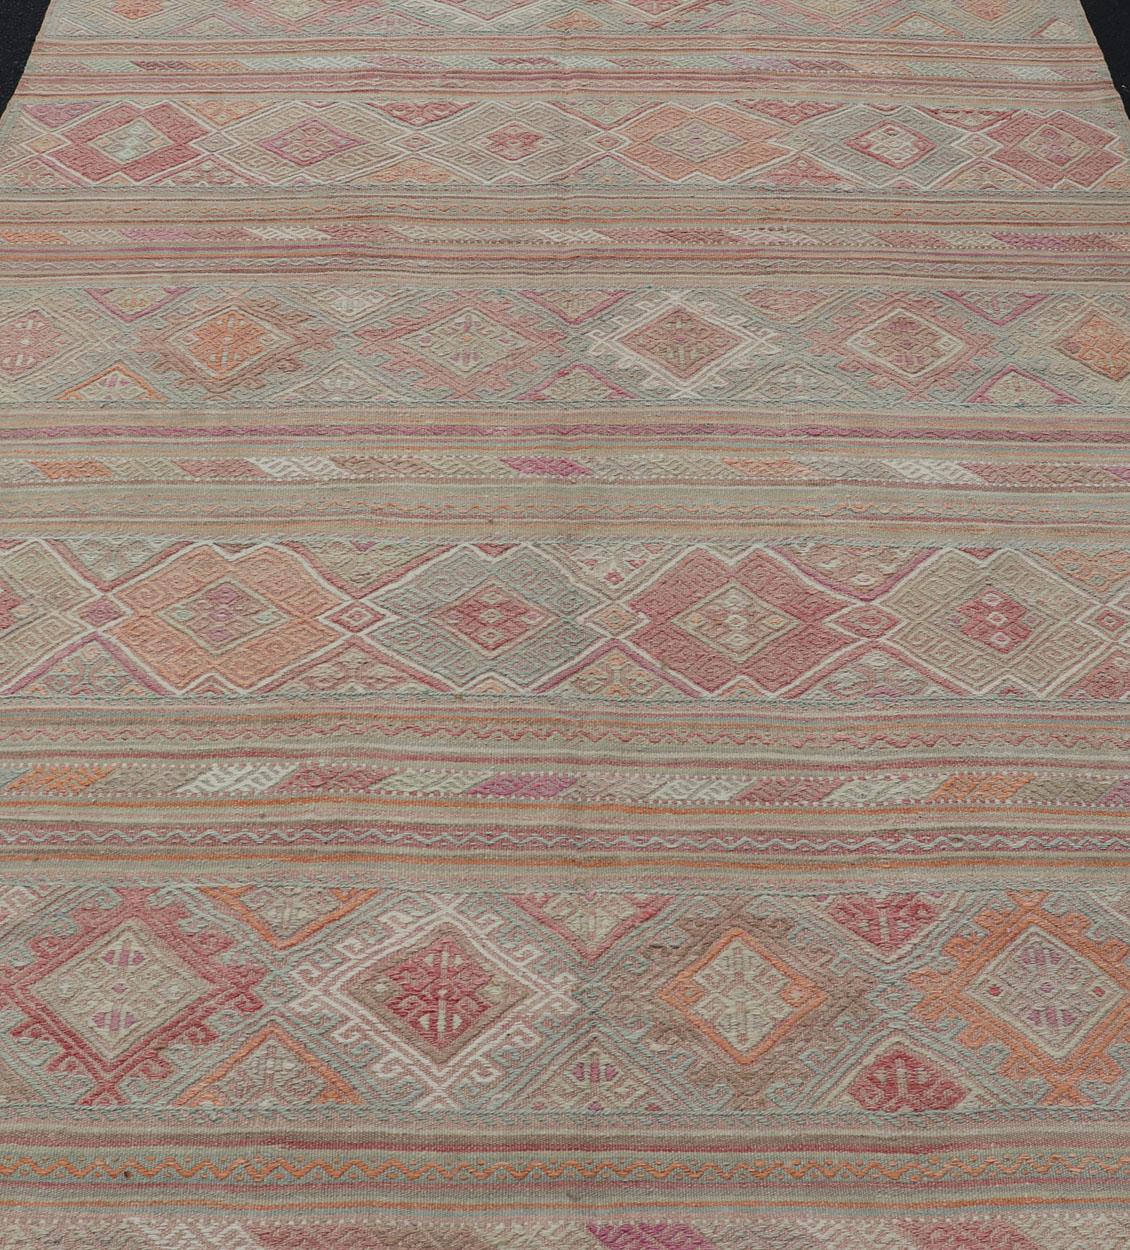 Wool Colorful Vintage Embroidered Kilim with Stripes and Alternating Geometric Motifs For Sale